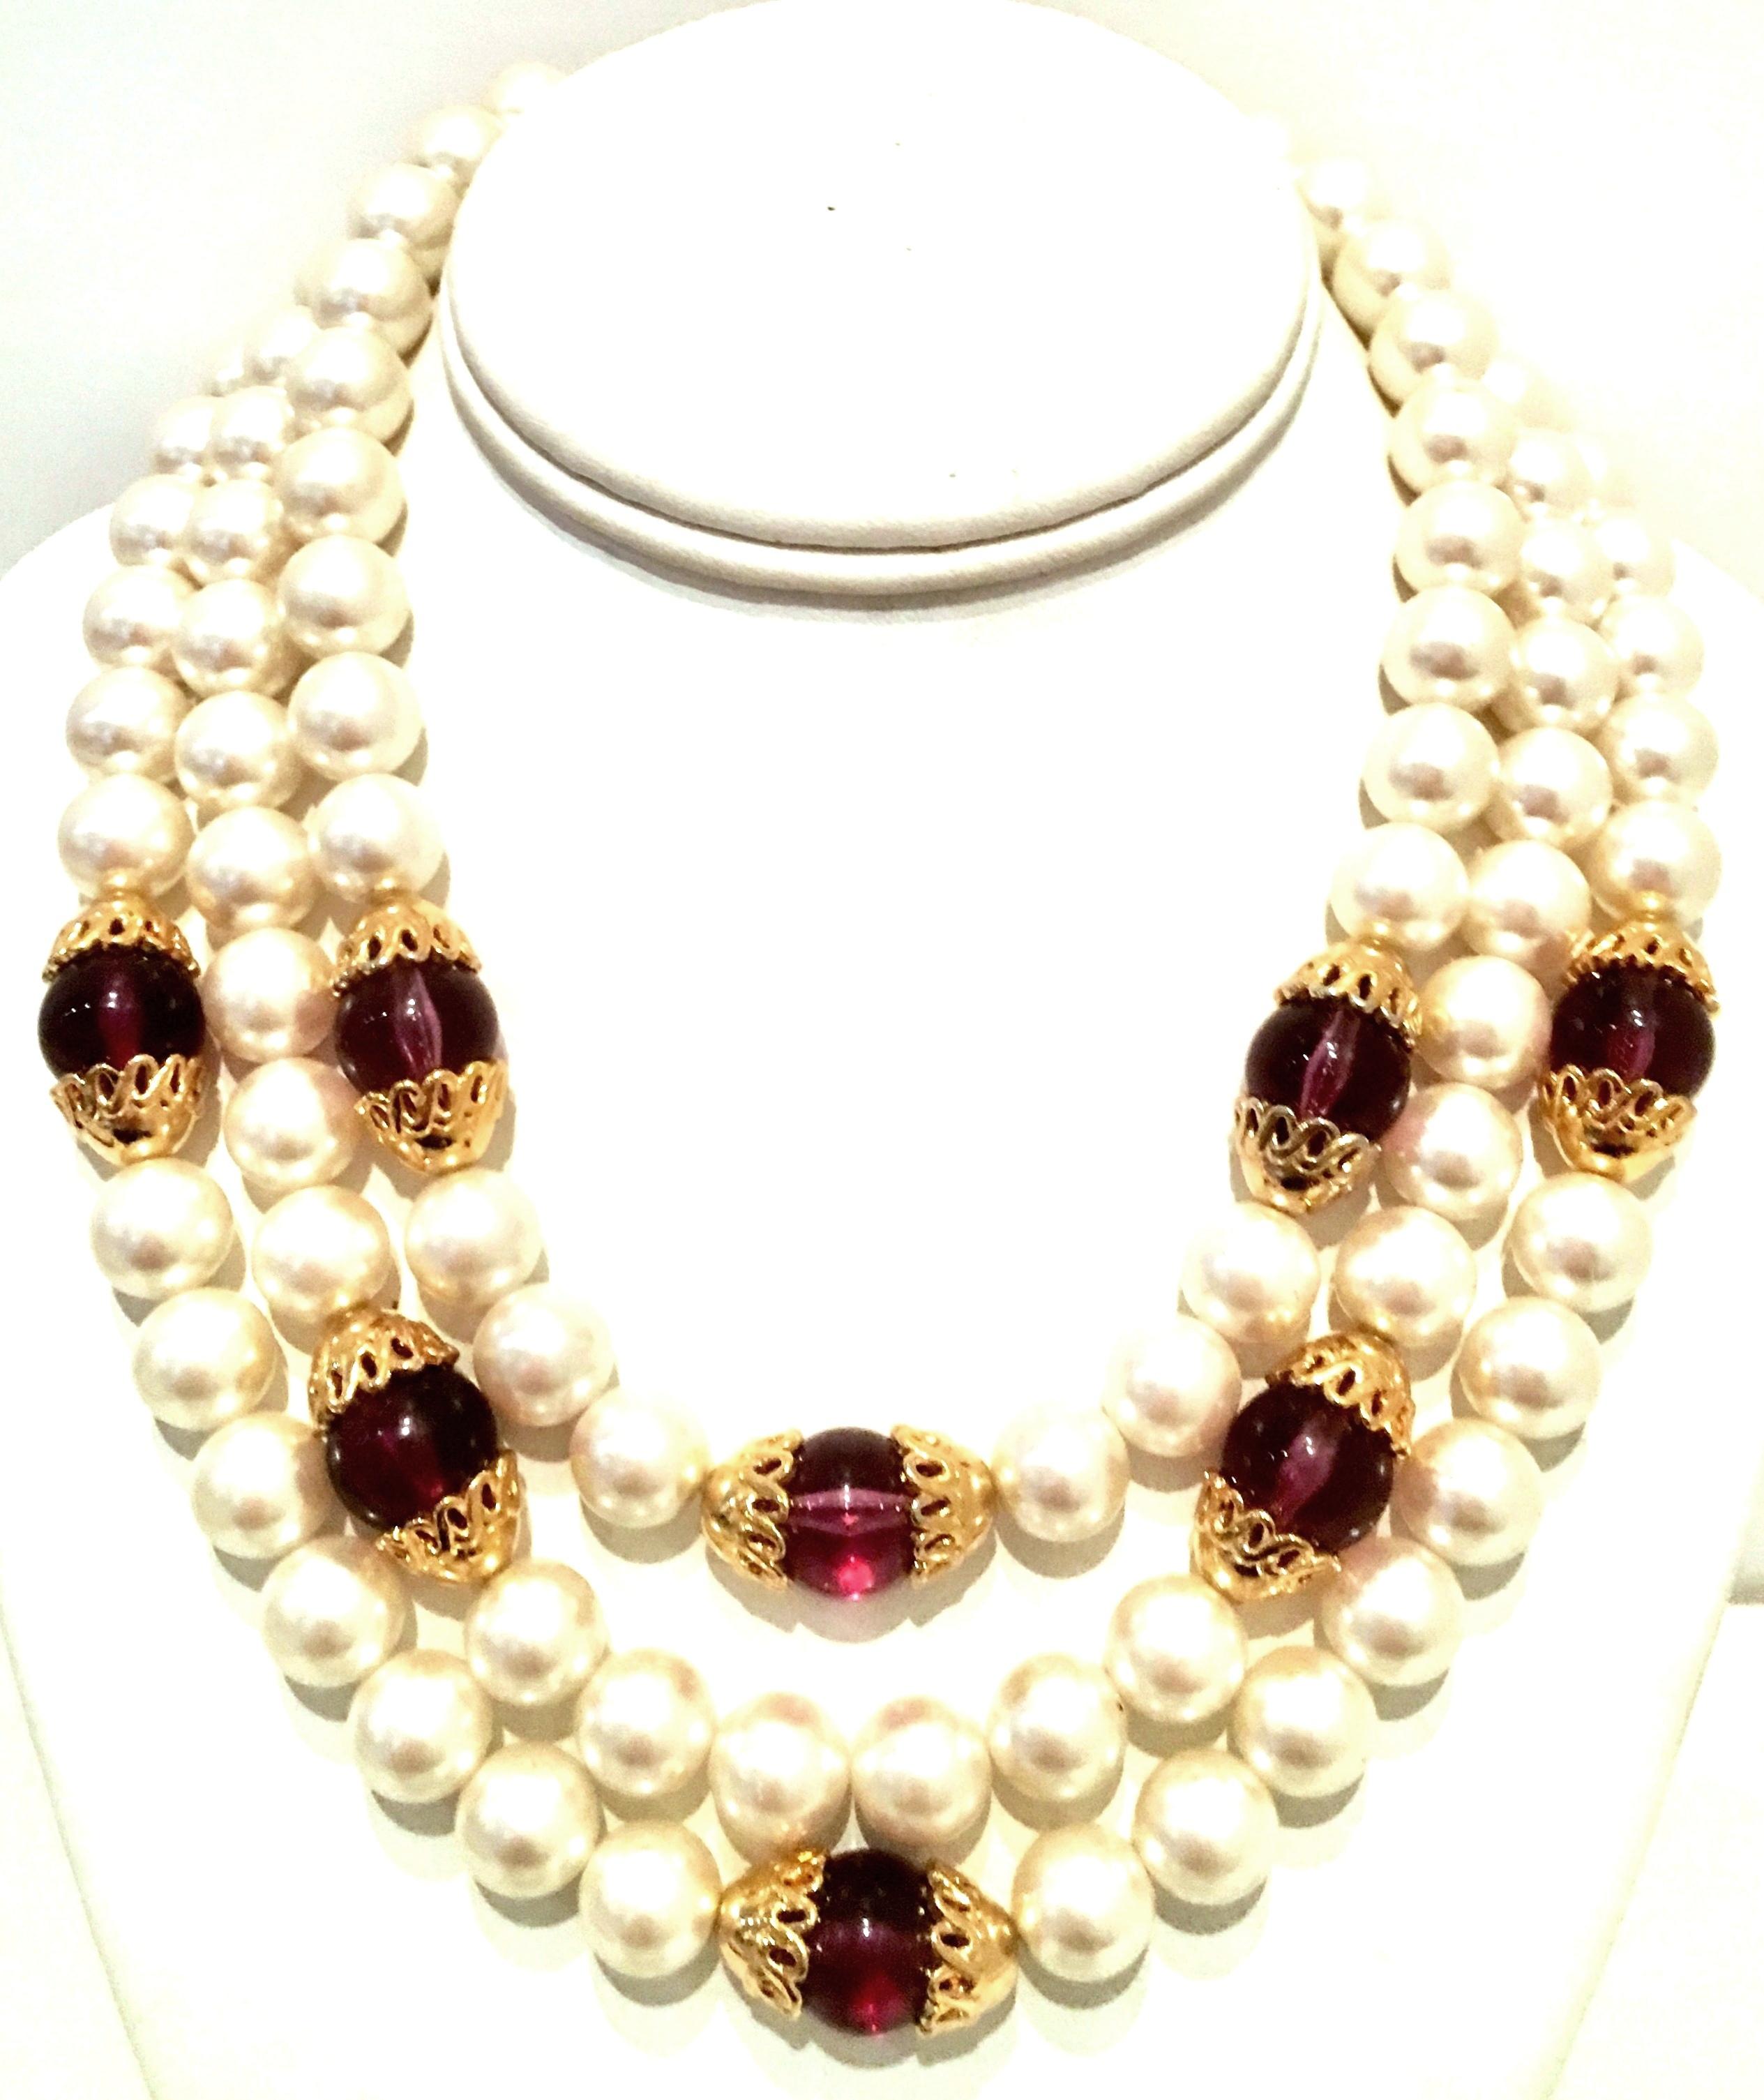 1990'S Faux Pearl, Amethyst Glass Bead & Gold Triple Strand Choker Style Necklace By, Napier. Features white faux pearls, amethyst glass beads and gold plate detail with fold over box style clasp. Each bead is approximately .50